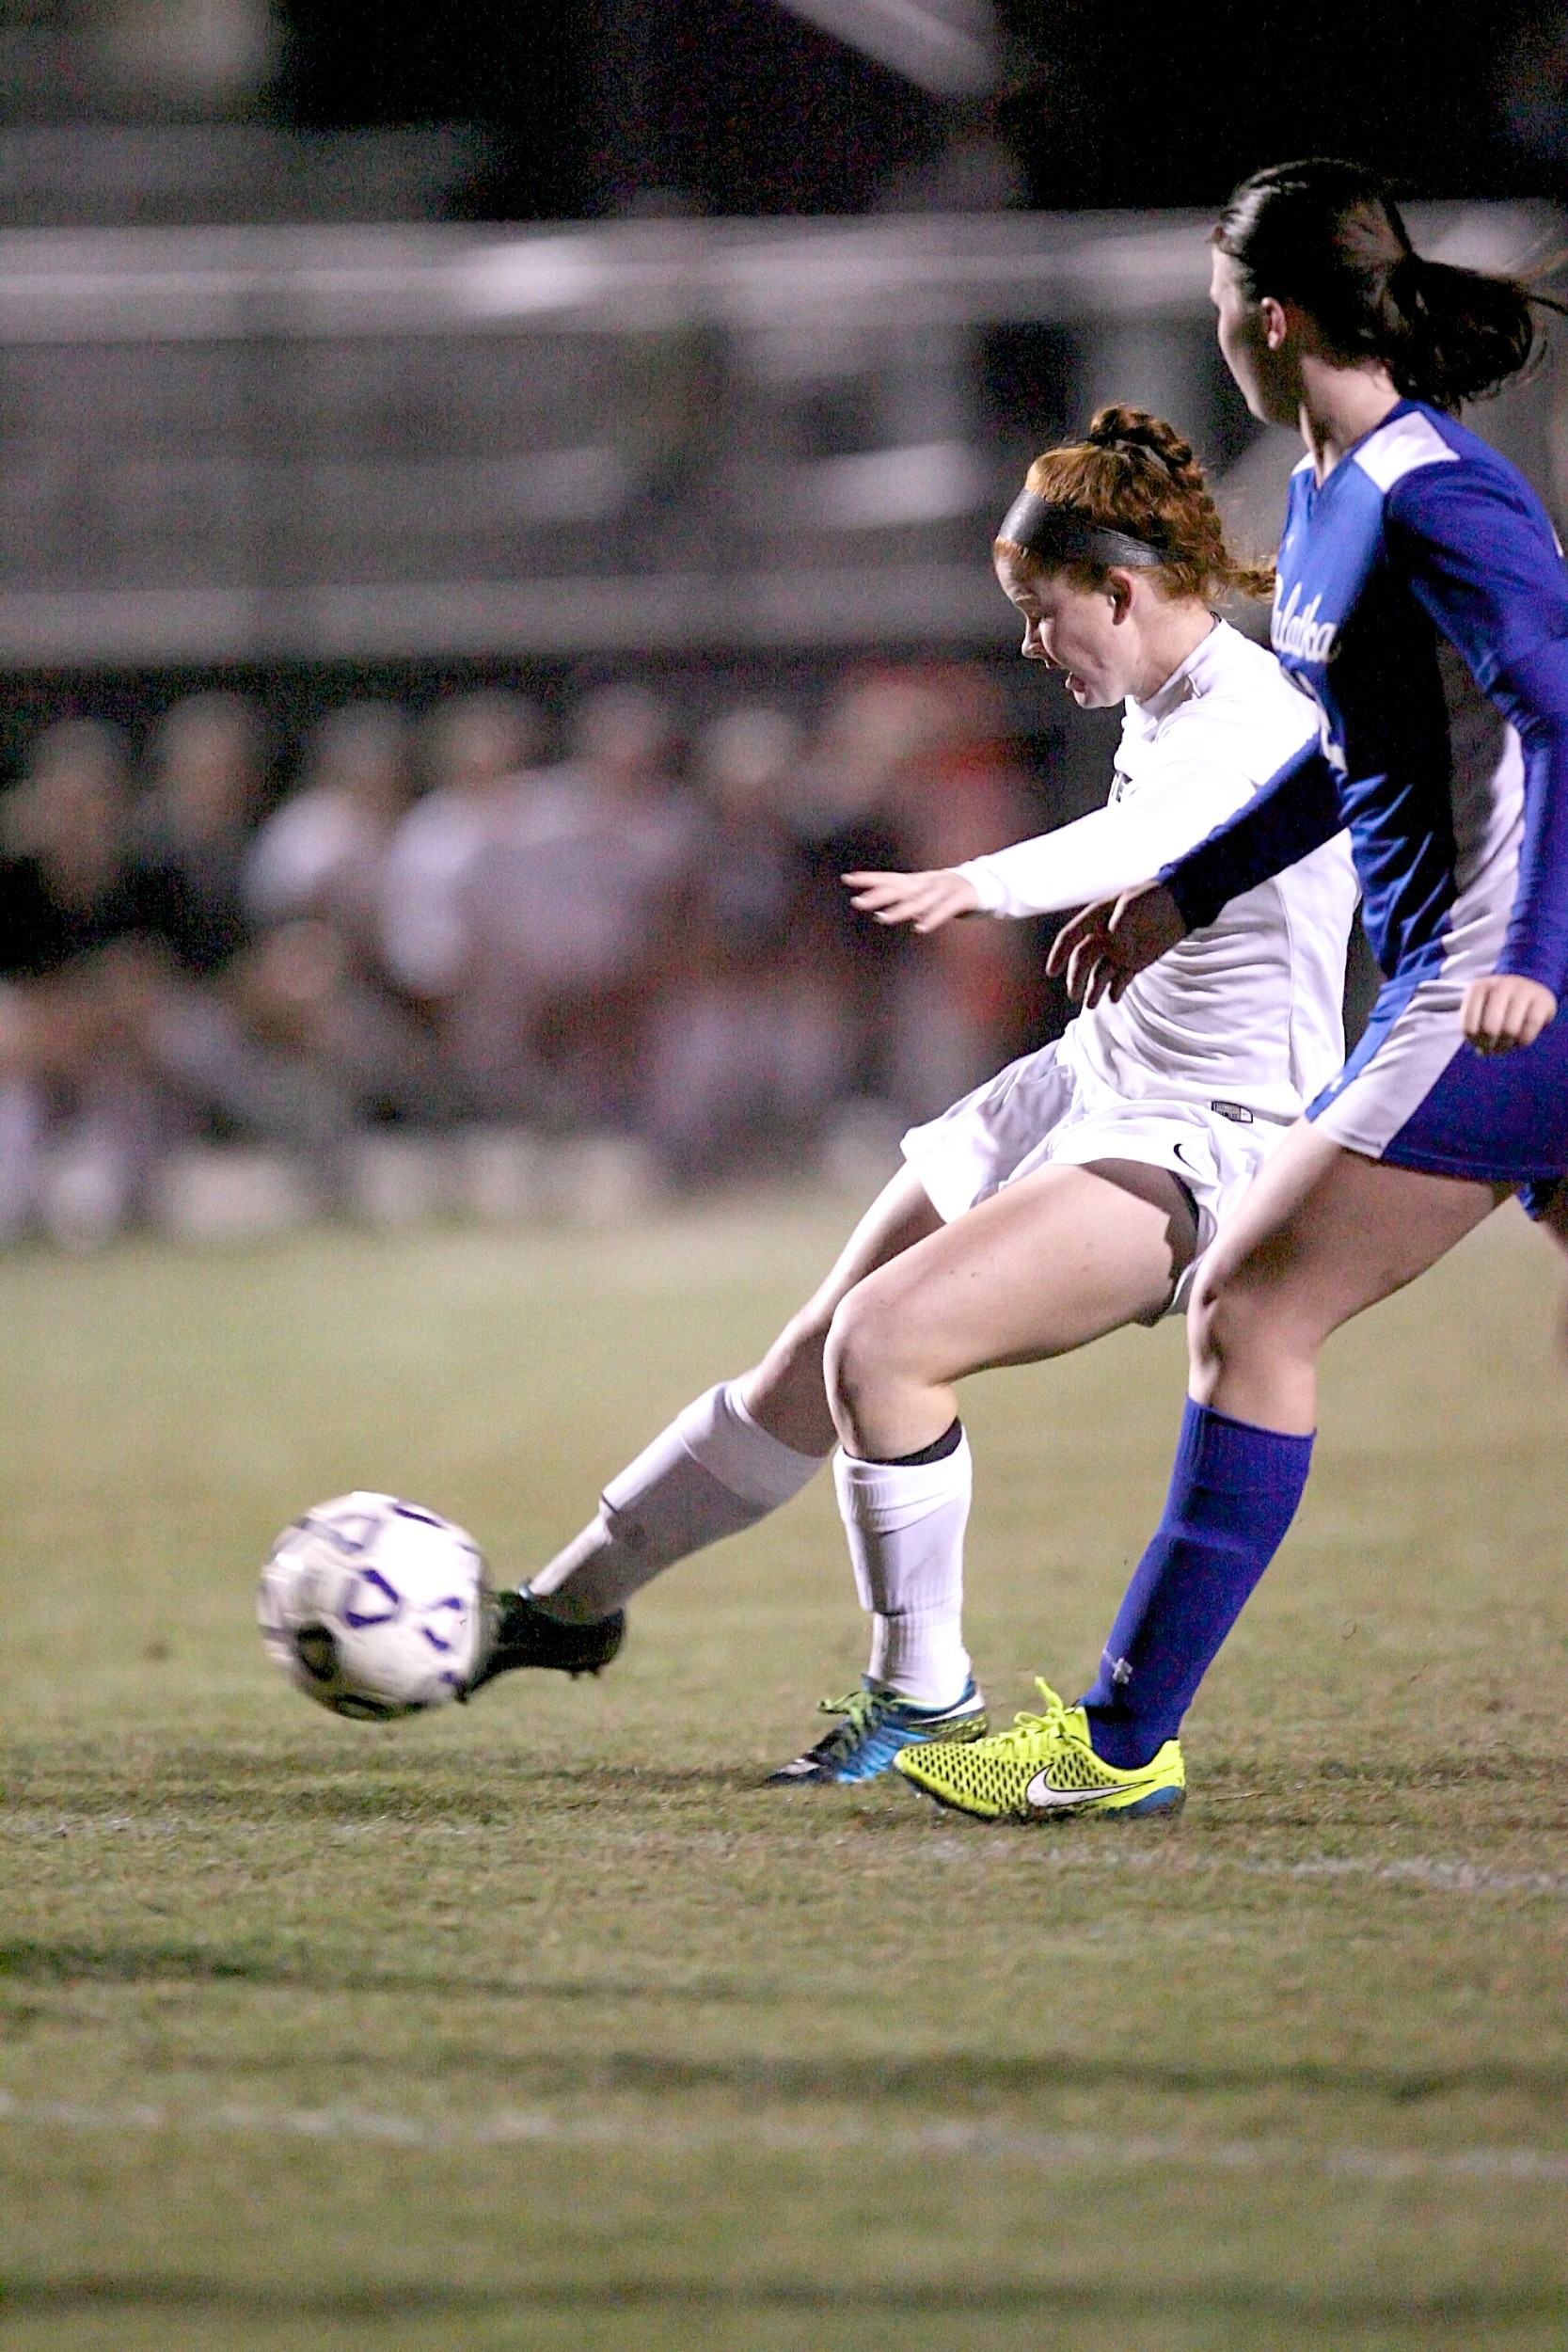 Angeline Daly drives the ball into the Palate goal for the Sharks’ first score.